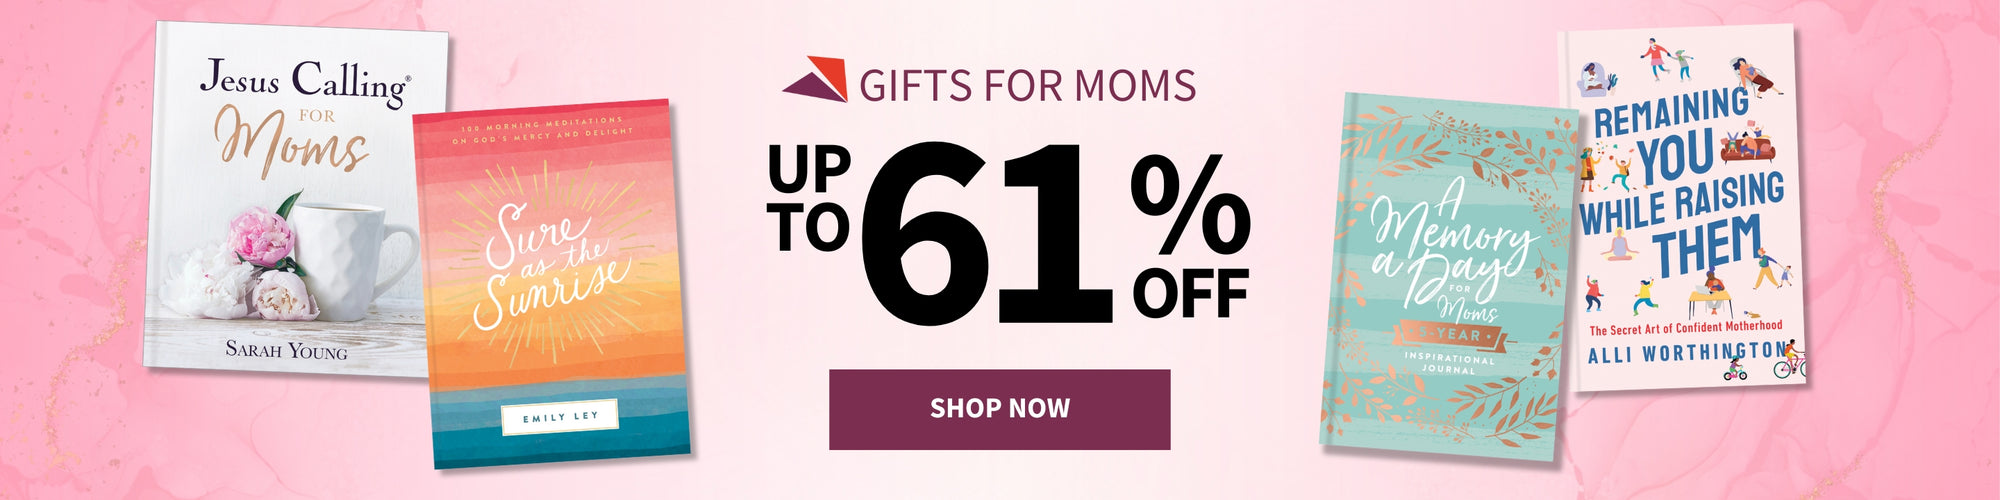 Up to 61% off Gifts for Moms